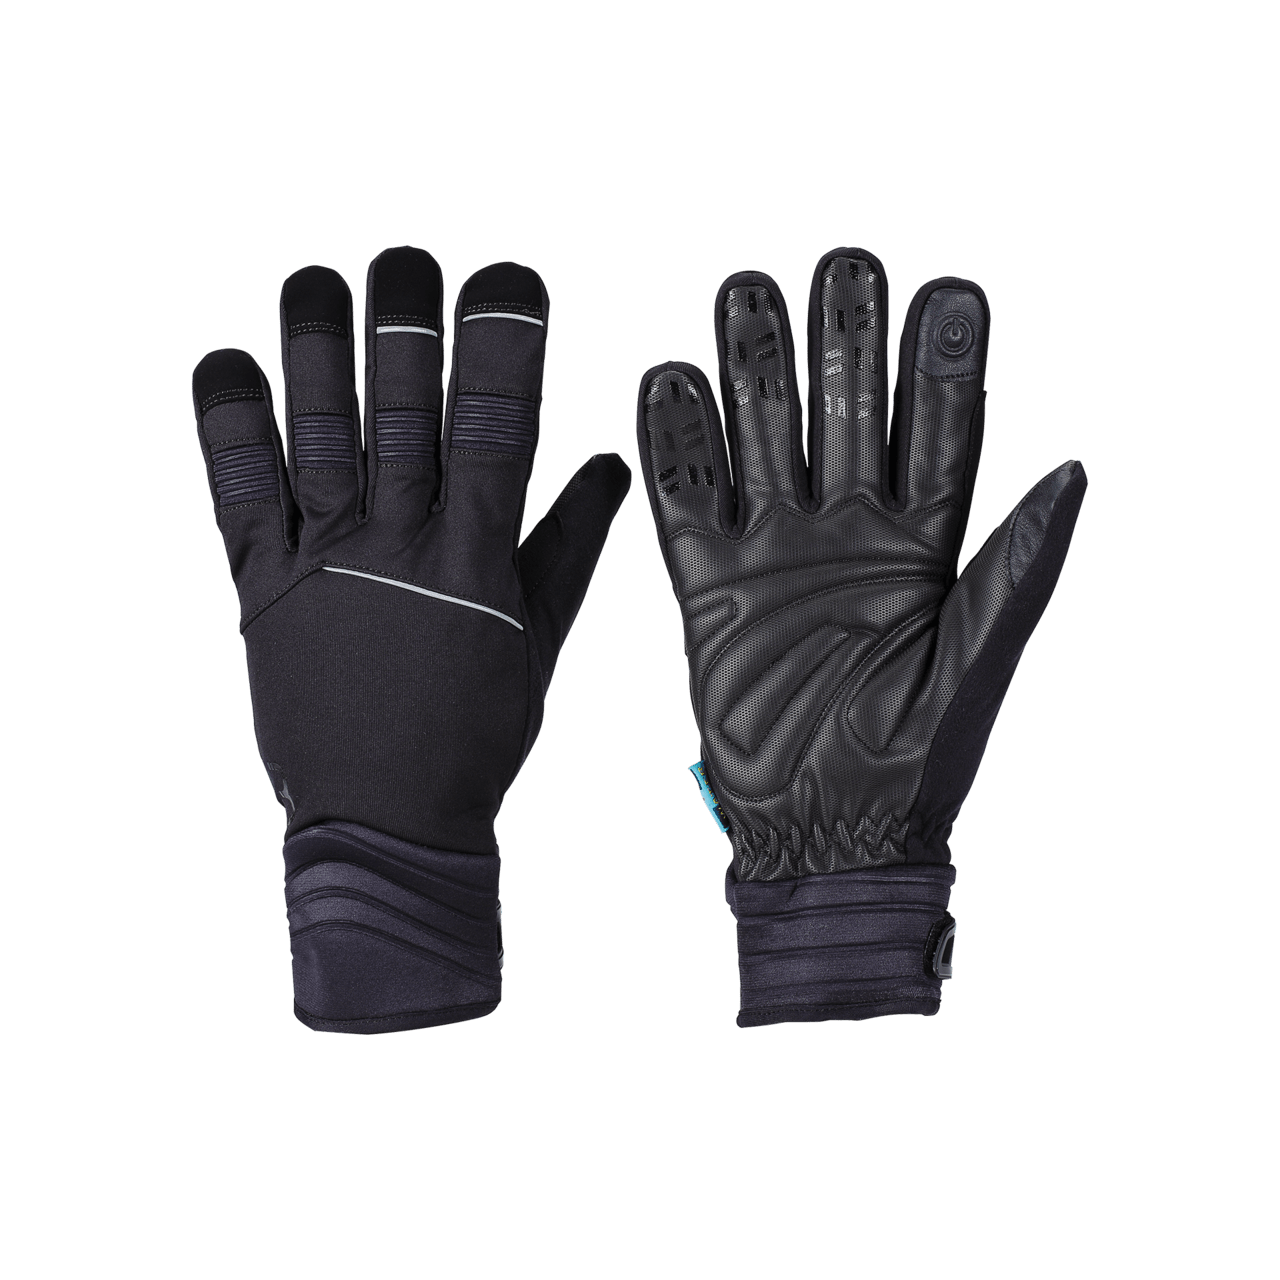 BBB BWG-32 WaterShield Winter Glove-Bicycle Gloves-BBB-Large-Chain Driven Cycles-Bike Shop-Ireland